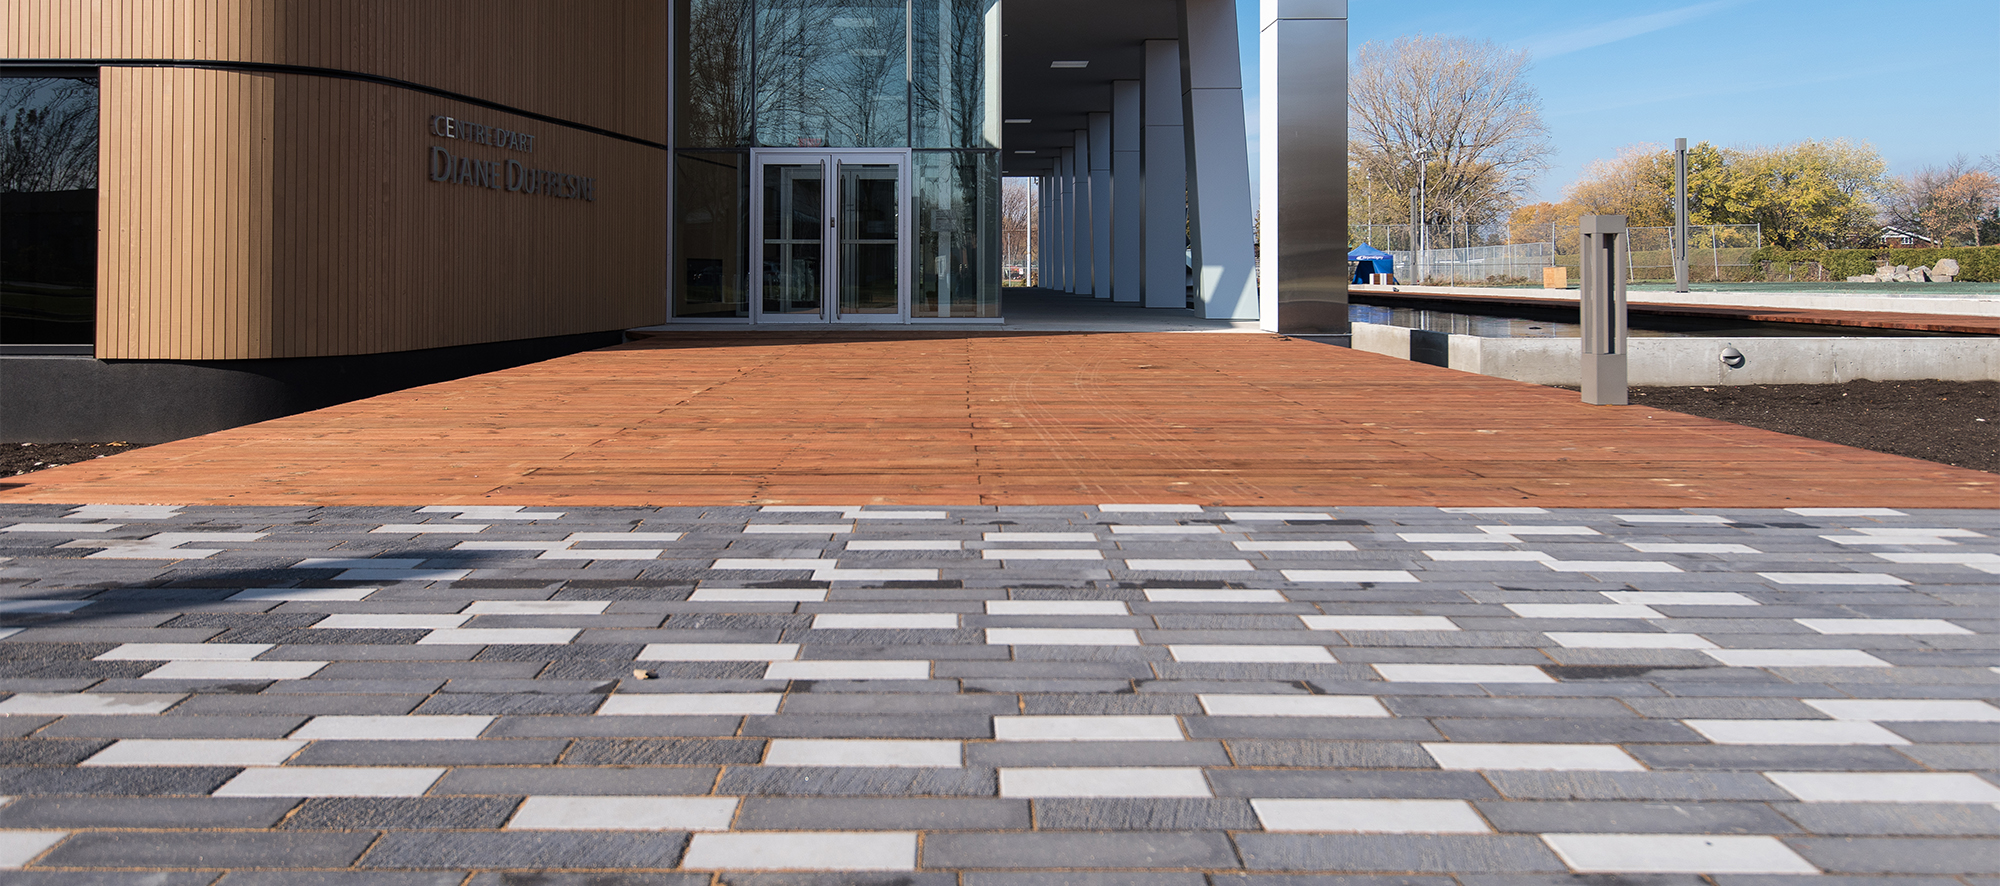 Tri-colored Il Campo pavers transition to a boardwalk-style walkway at the front entrance of the building.